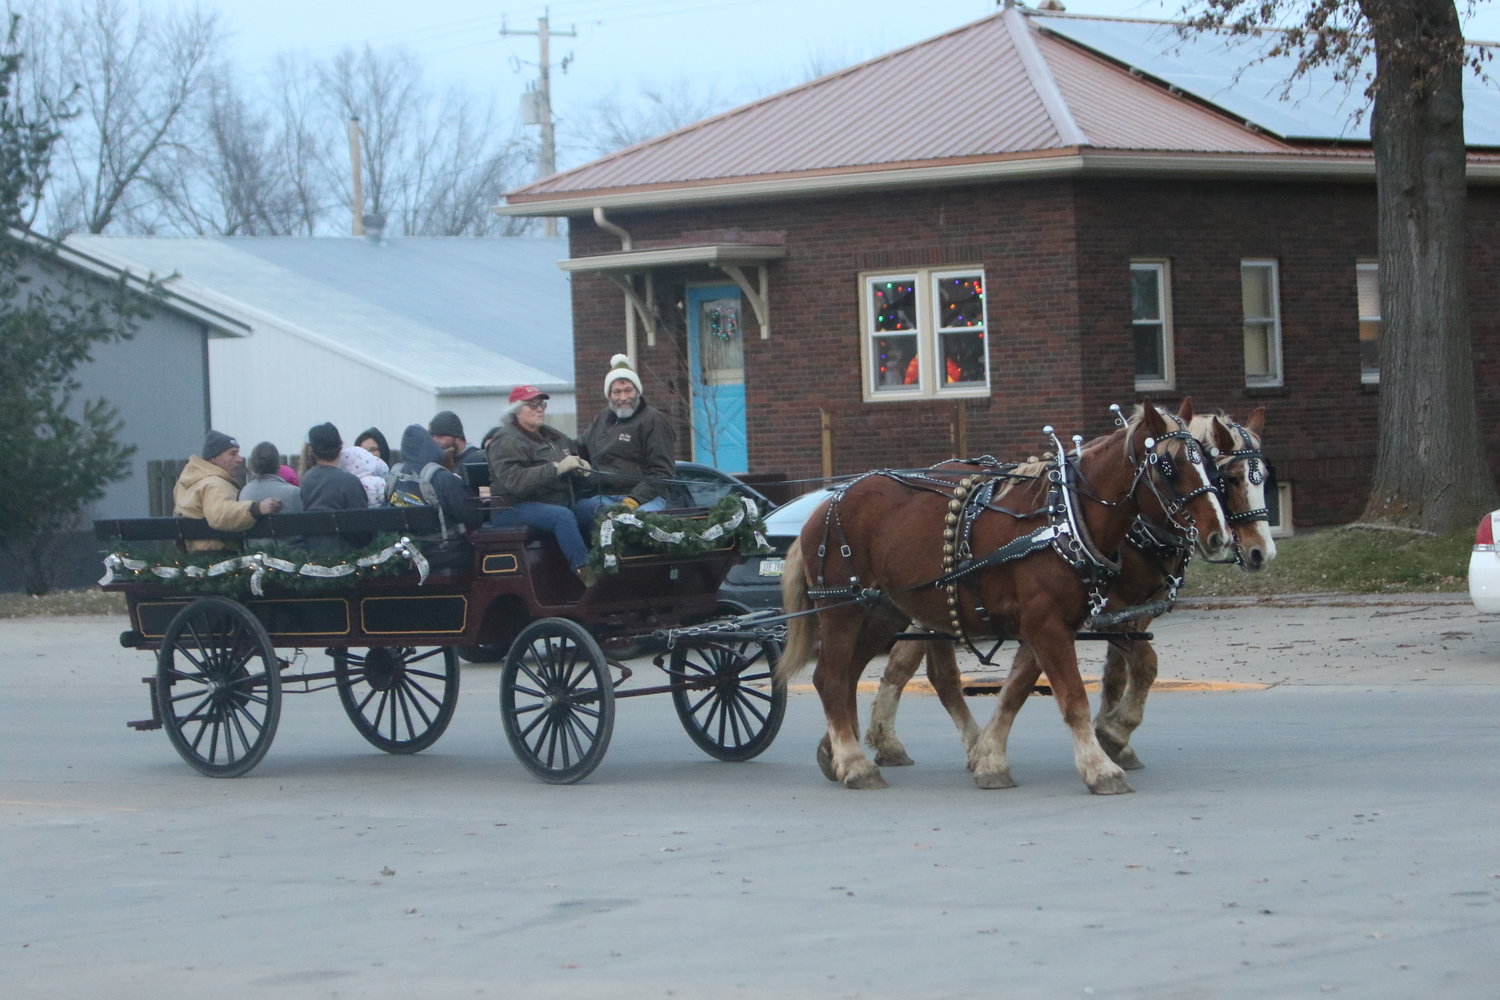 Carriage rides around Lone Tree were a popular event during Winter Fest.